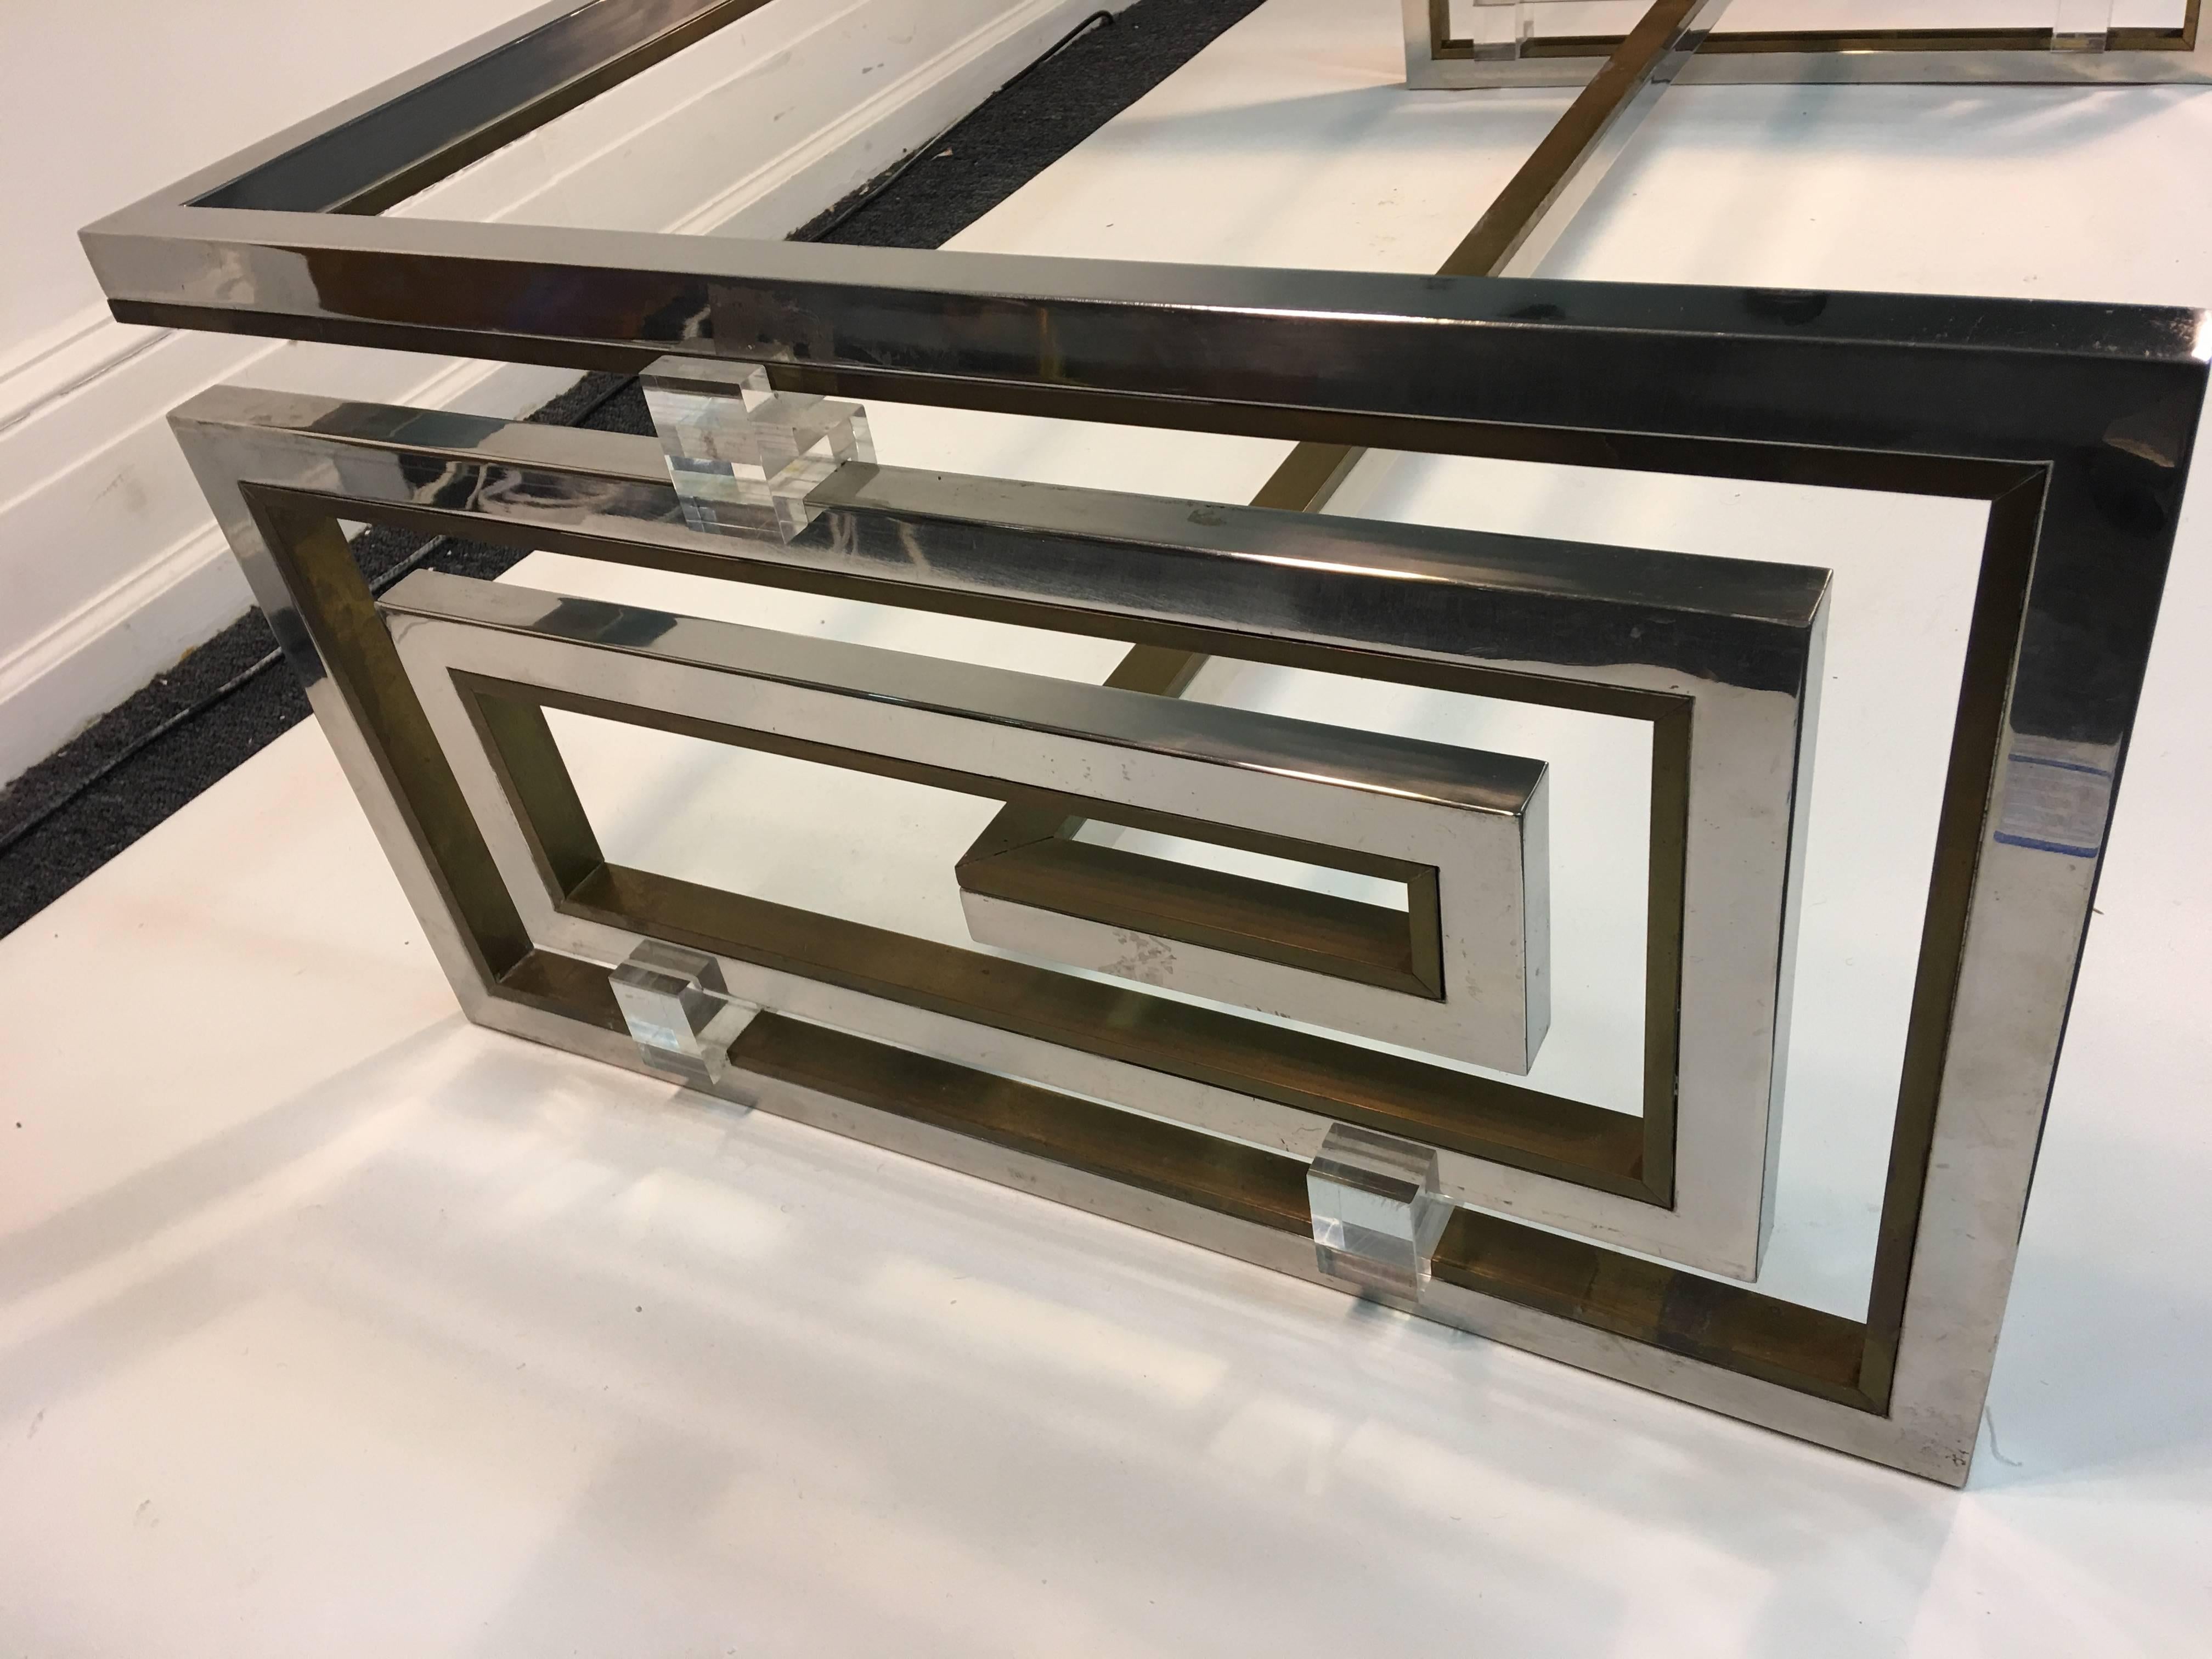 High Style 1970s Italian Design Coffee Table by Romeo Rega designed in a Modernist Greek Key Double Sided Form. Signed Romeo Rega Made In Italy .Composed of Chrome, Brass and Lucite. The rectangular glass fits in the square Lucite holders. The other